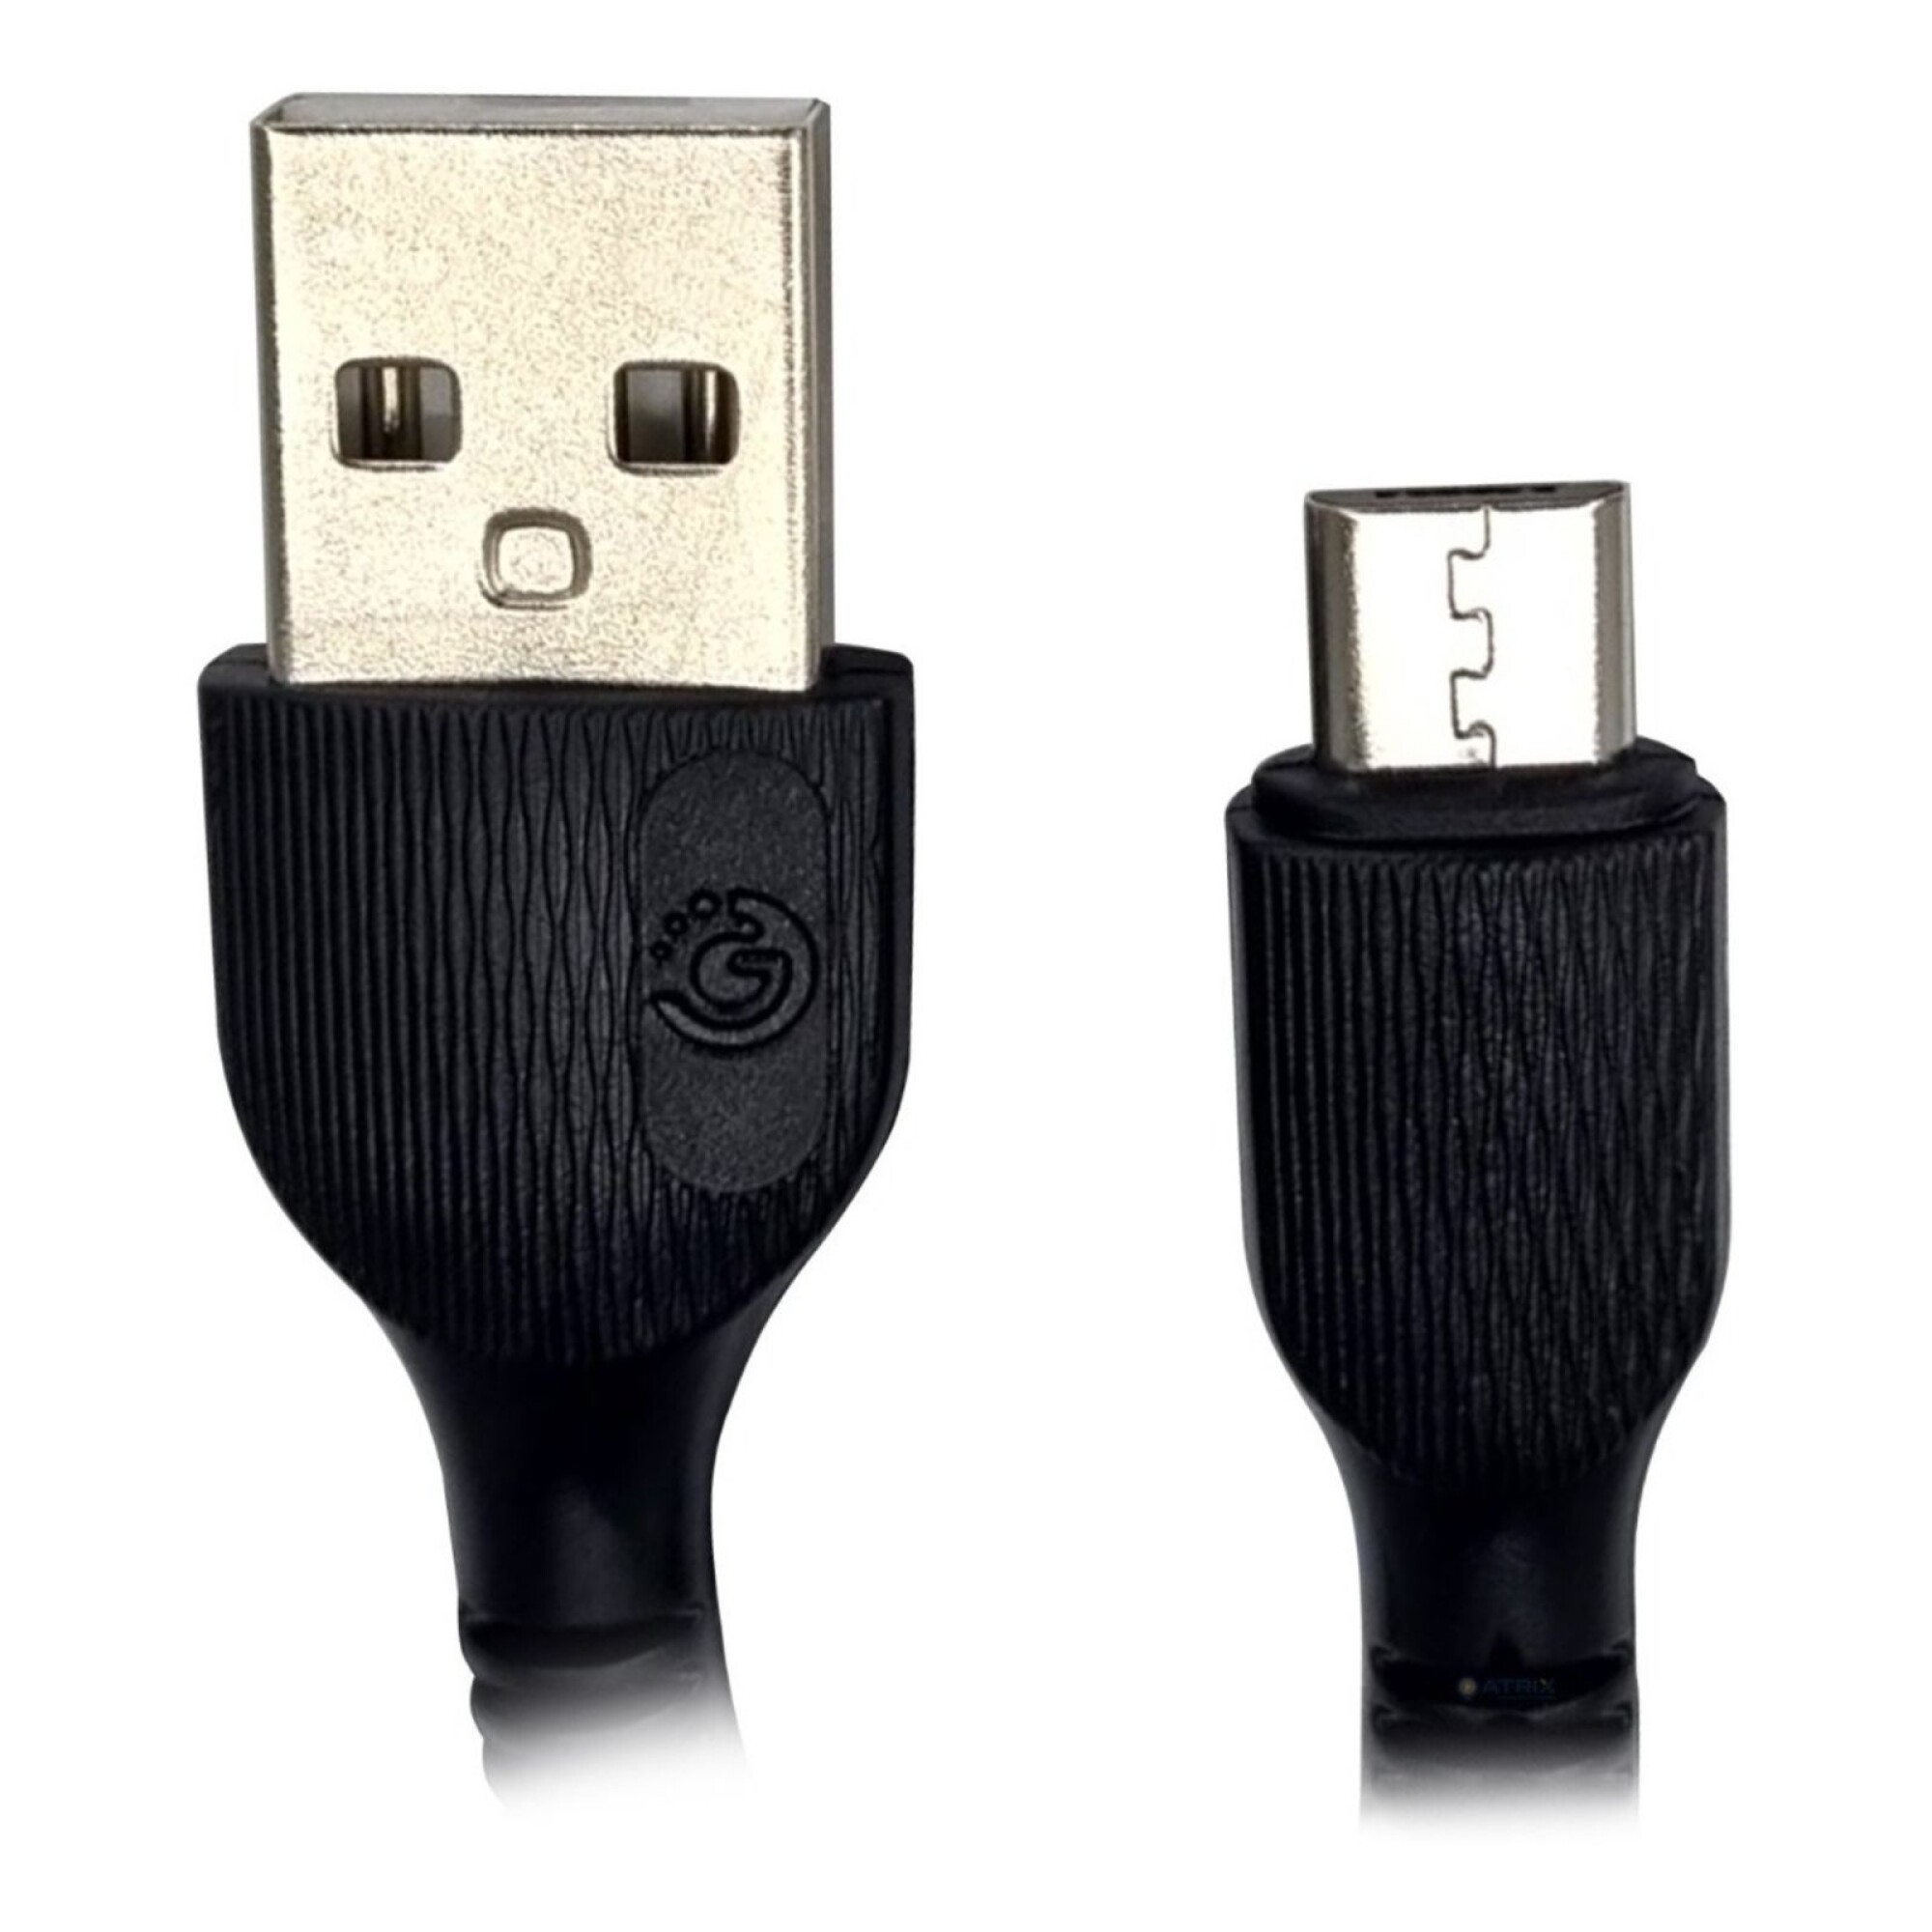 Cable USB, 1 Metro